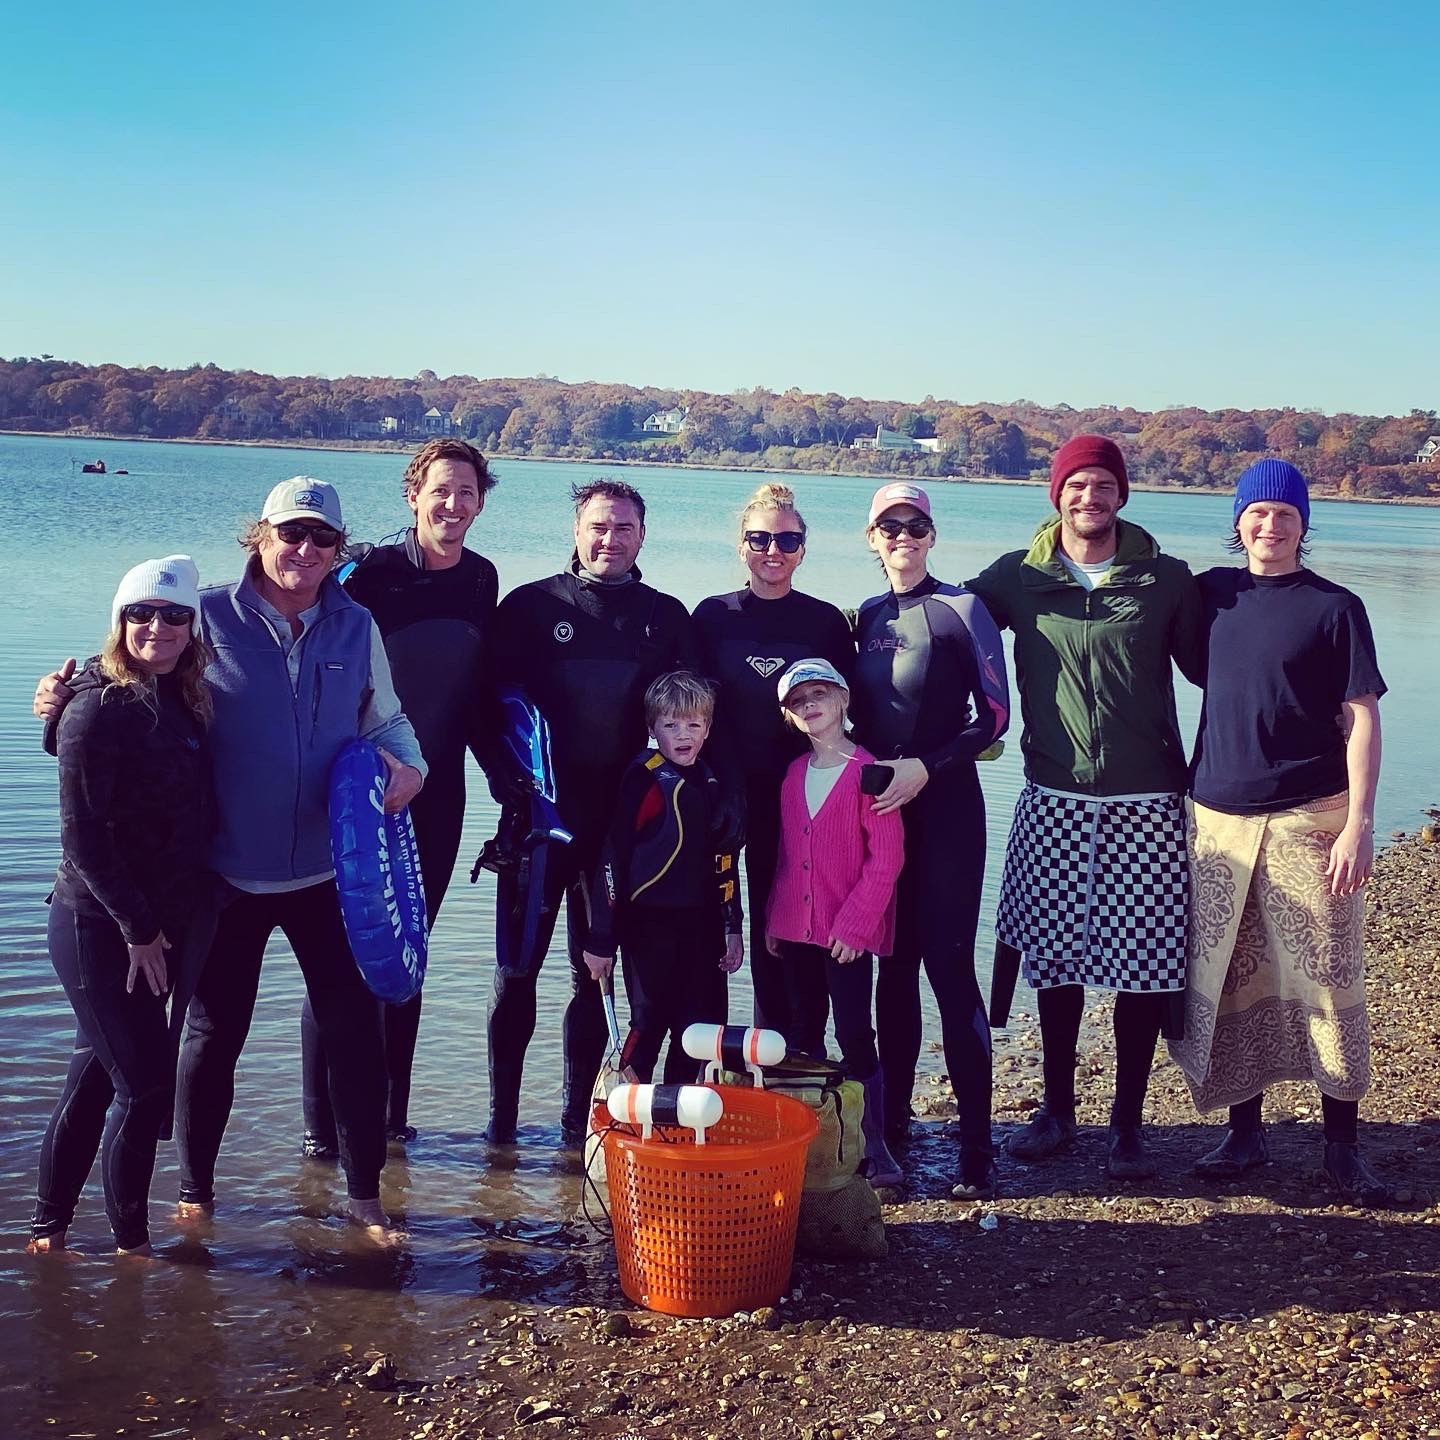 Scallopers descened on Three Mile Harbor in East Hampton on Sunday in hopes of collecting bushel baskets full of bay scallops but found precious few of the valuable shellfish. 